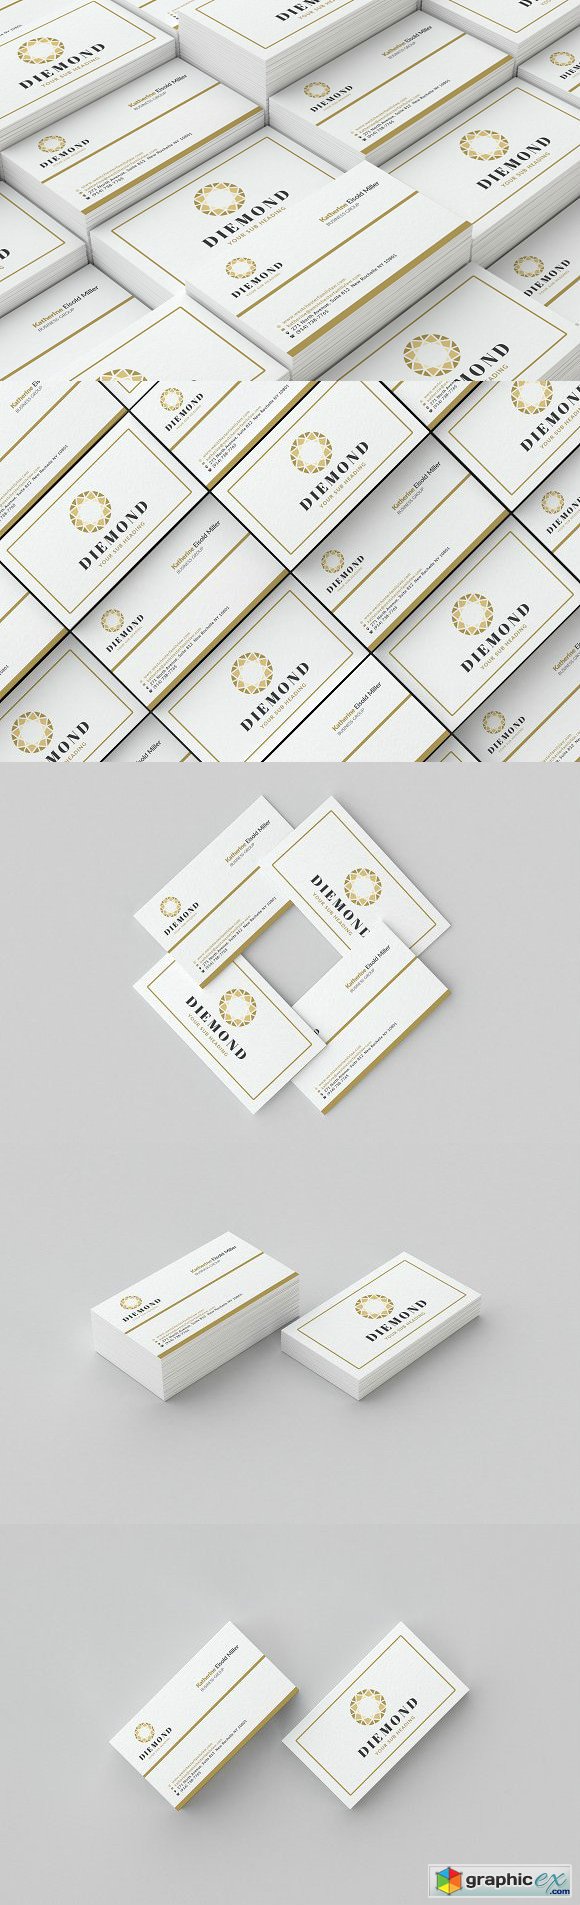 Creative Business Cards 2161889